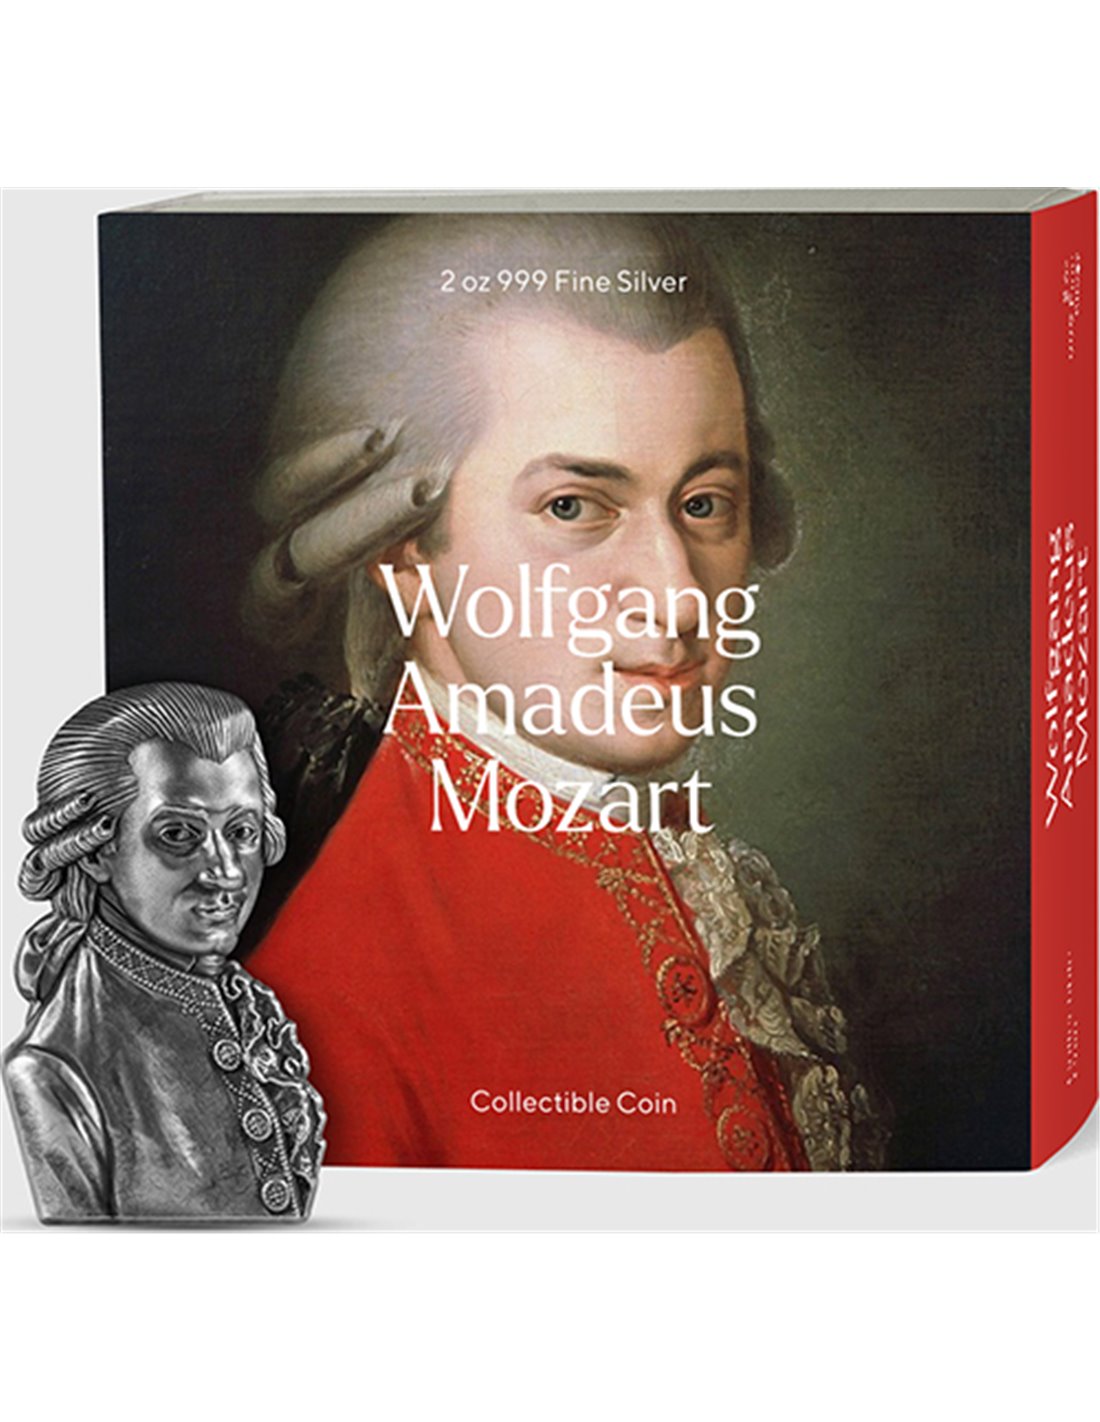 WOLFGANG AMADEUS MOZART 10000 2023 Coin Oz Silver Chad Francs 2 Shaped